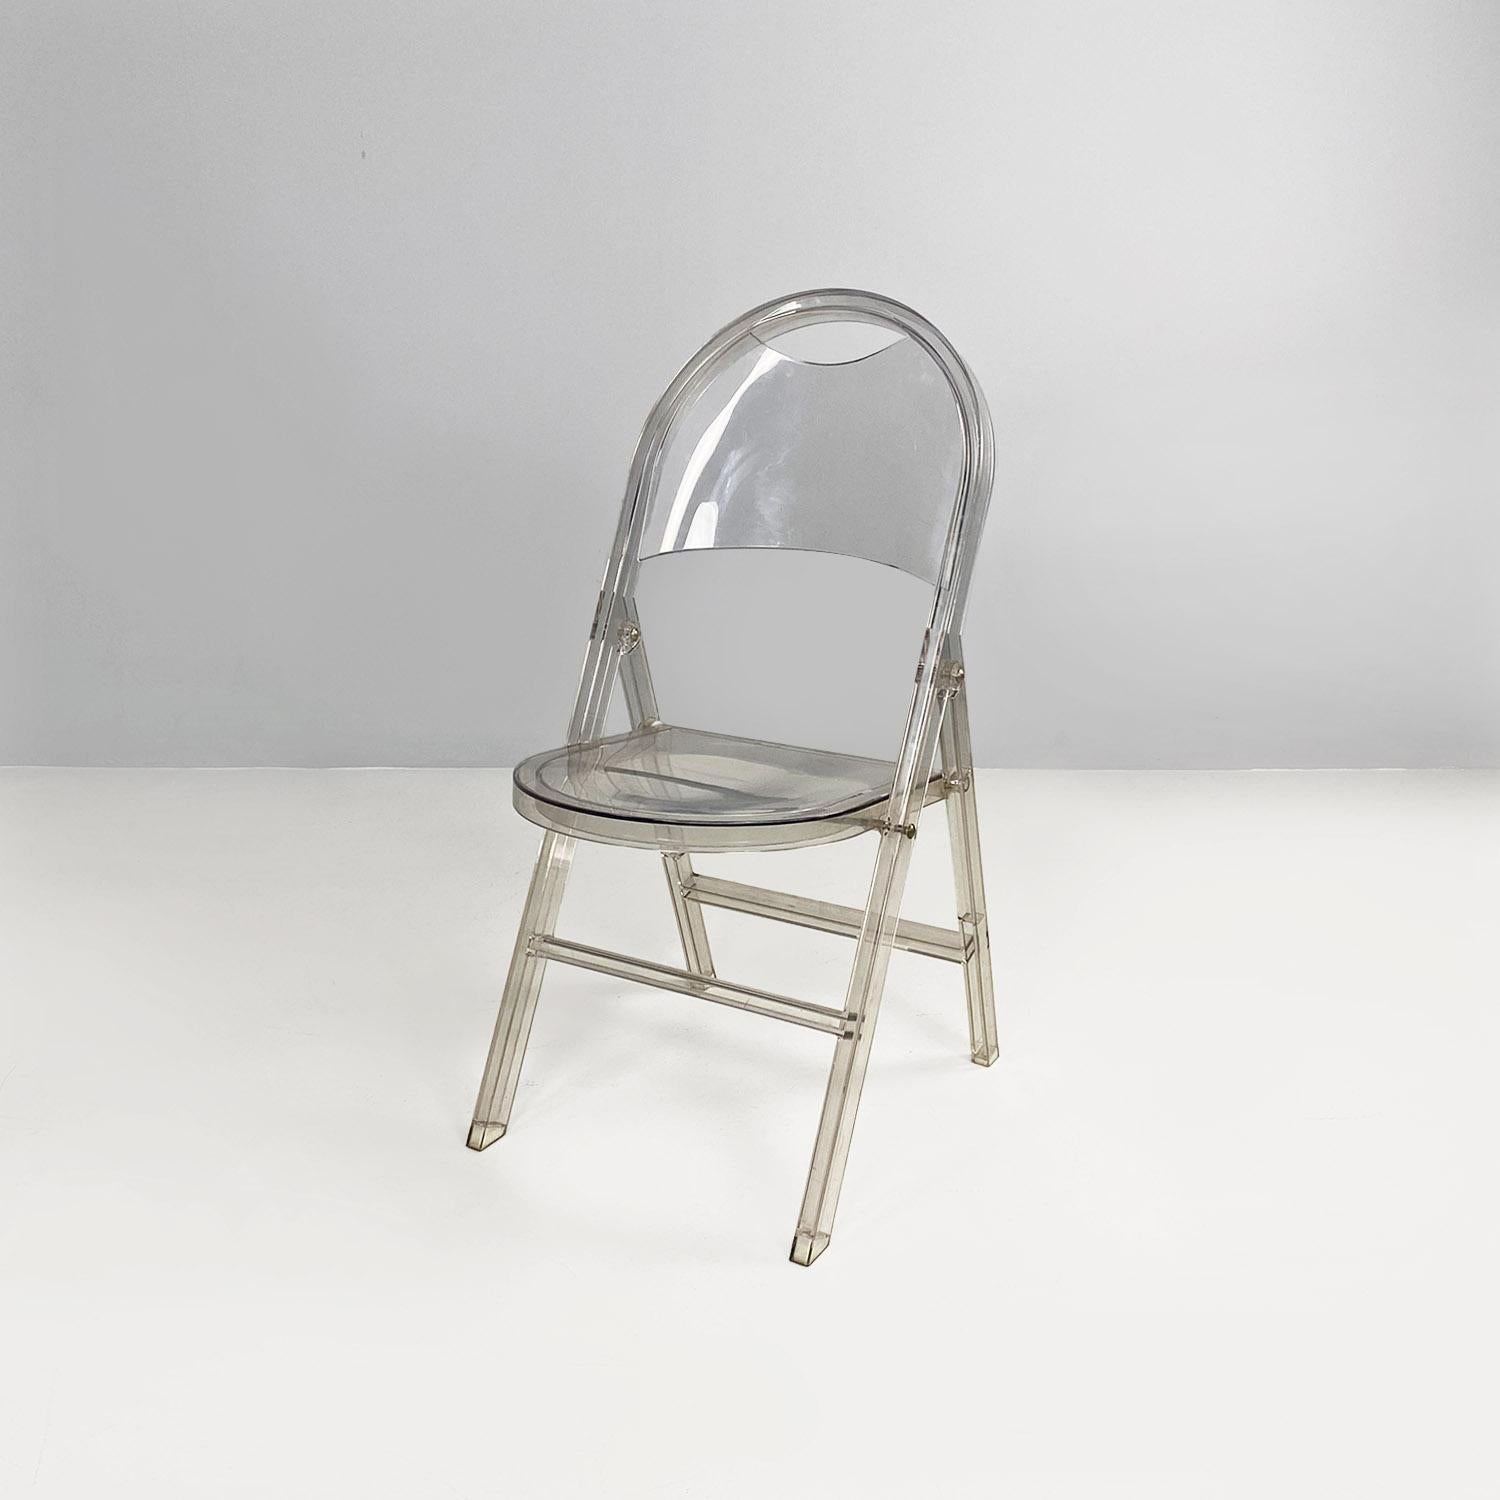 Italian modern Folding chair Tric by Achille and Pier Giacomo Castiglioni for Bonacina, 2000s
Folding chair mod. Tric entirely in transparent plexiglass. The seat and backrest are rounded. The legs have a rectangular section.
Produced by Bonacina in